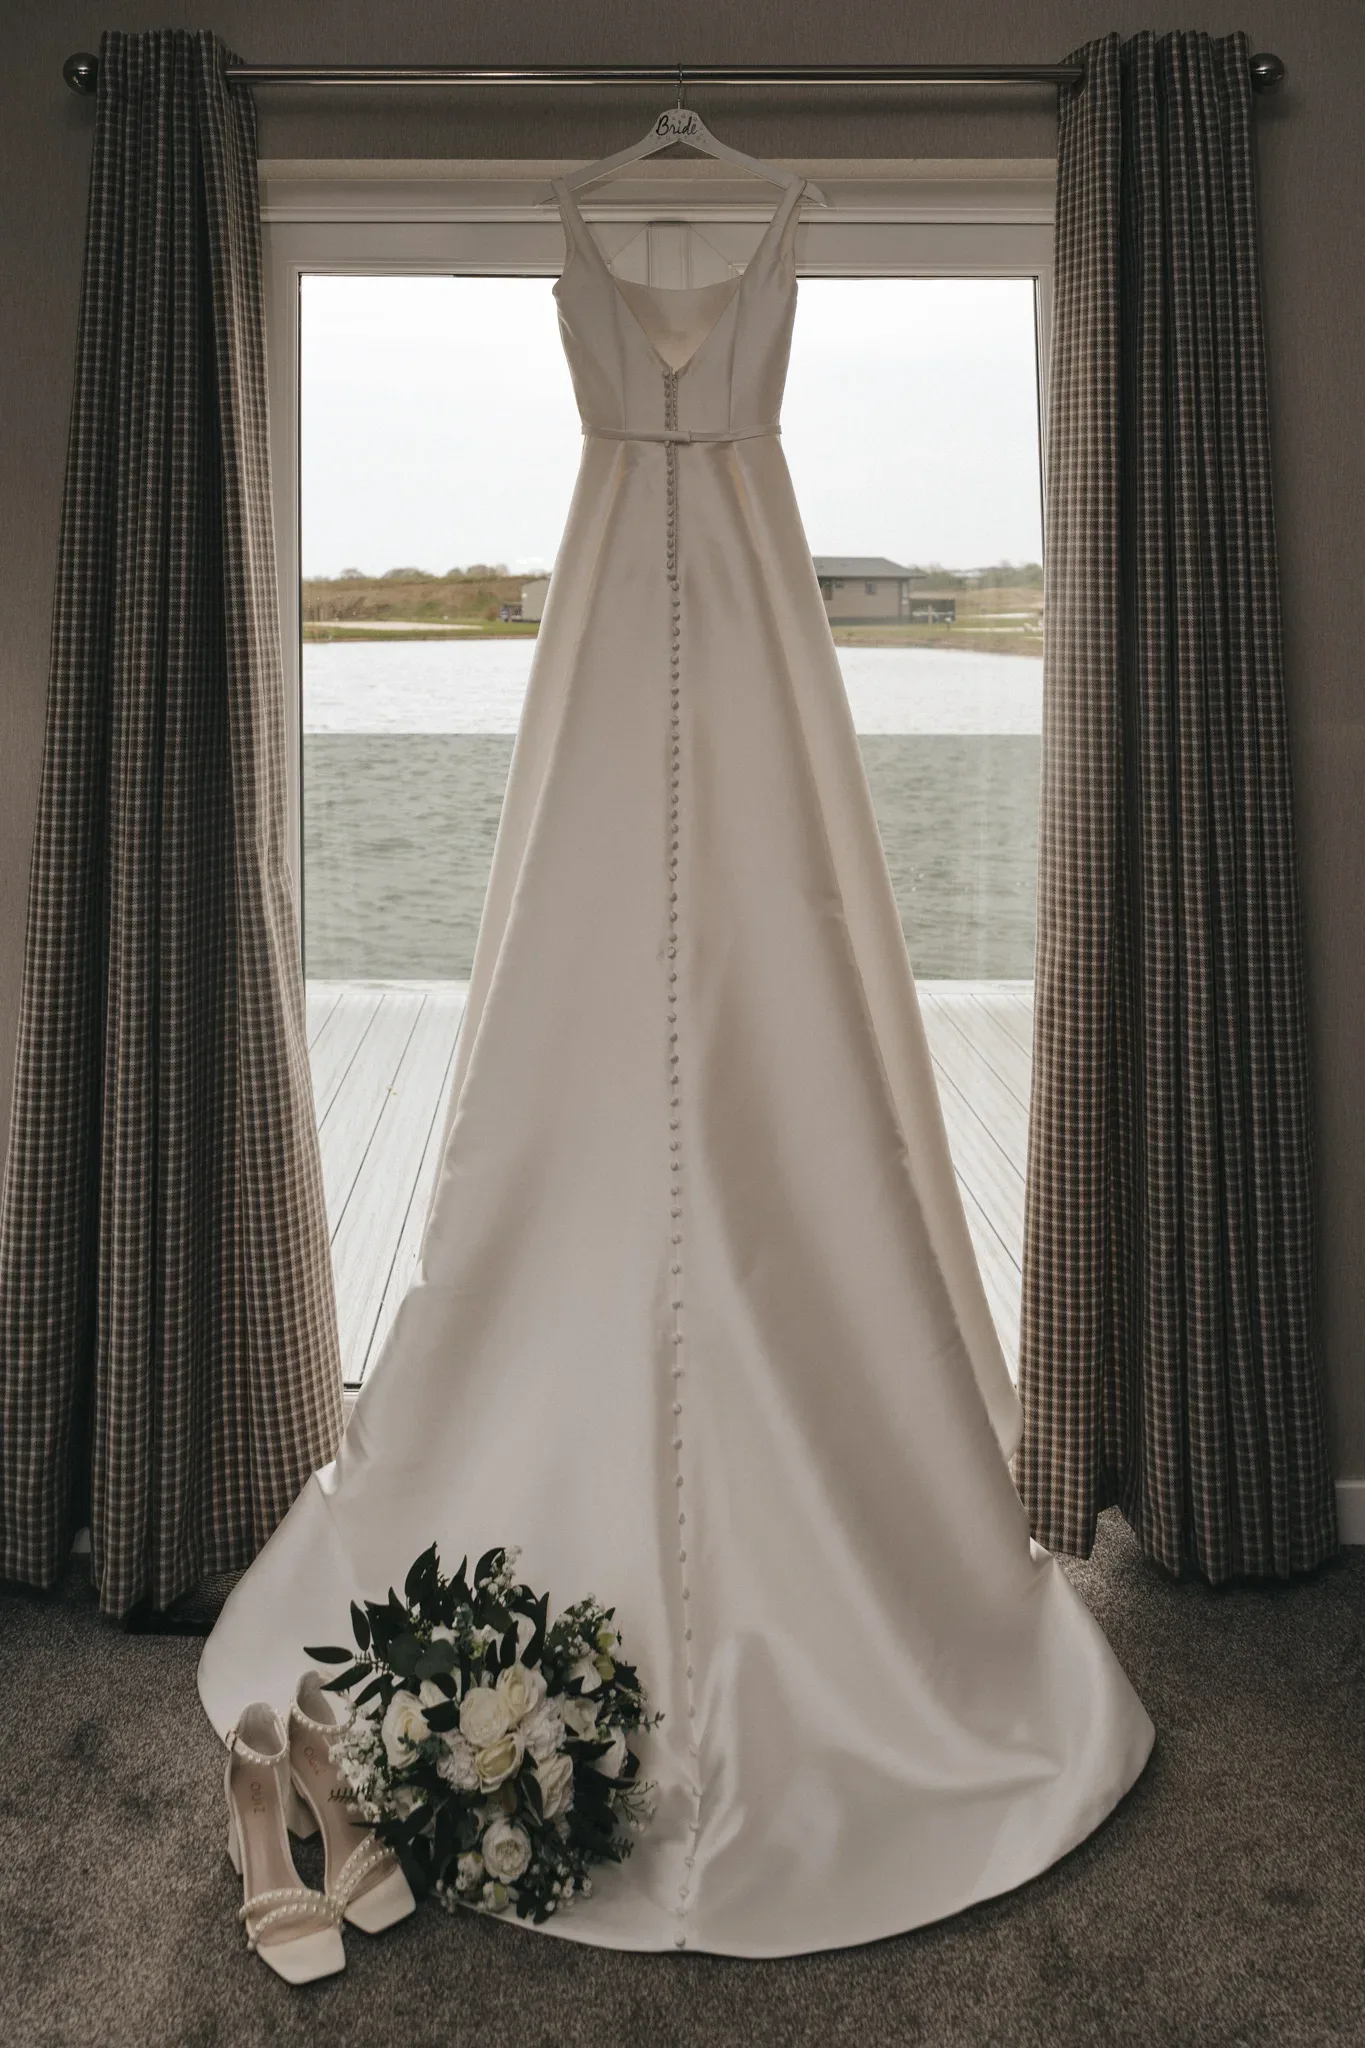 A wedding dress hangs in front of a window framed by curtains, overlooking a lake. below, a pair of white bridal shoes and a bouquet of white flowers with green leaves are placed on the carpet.